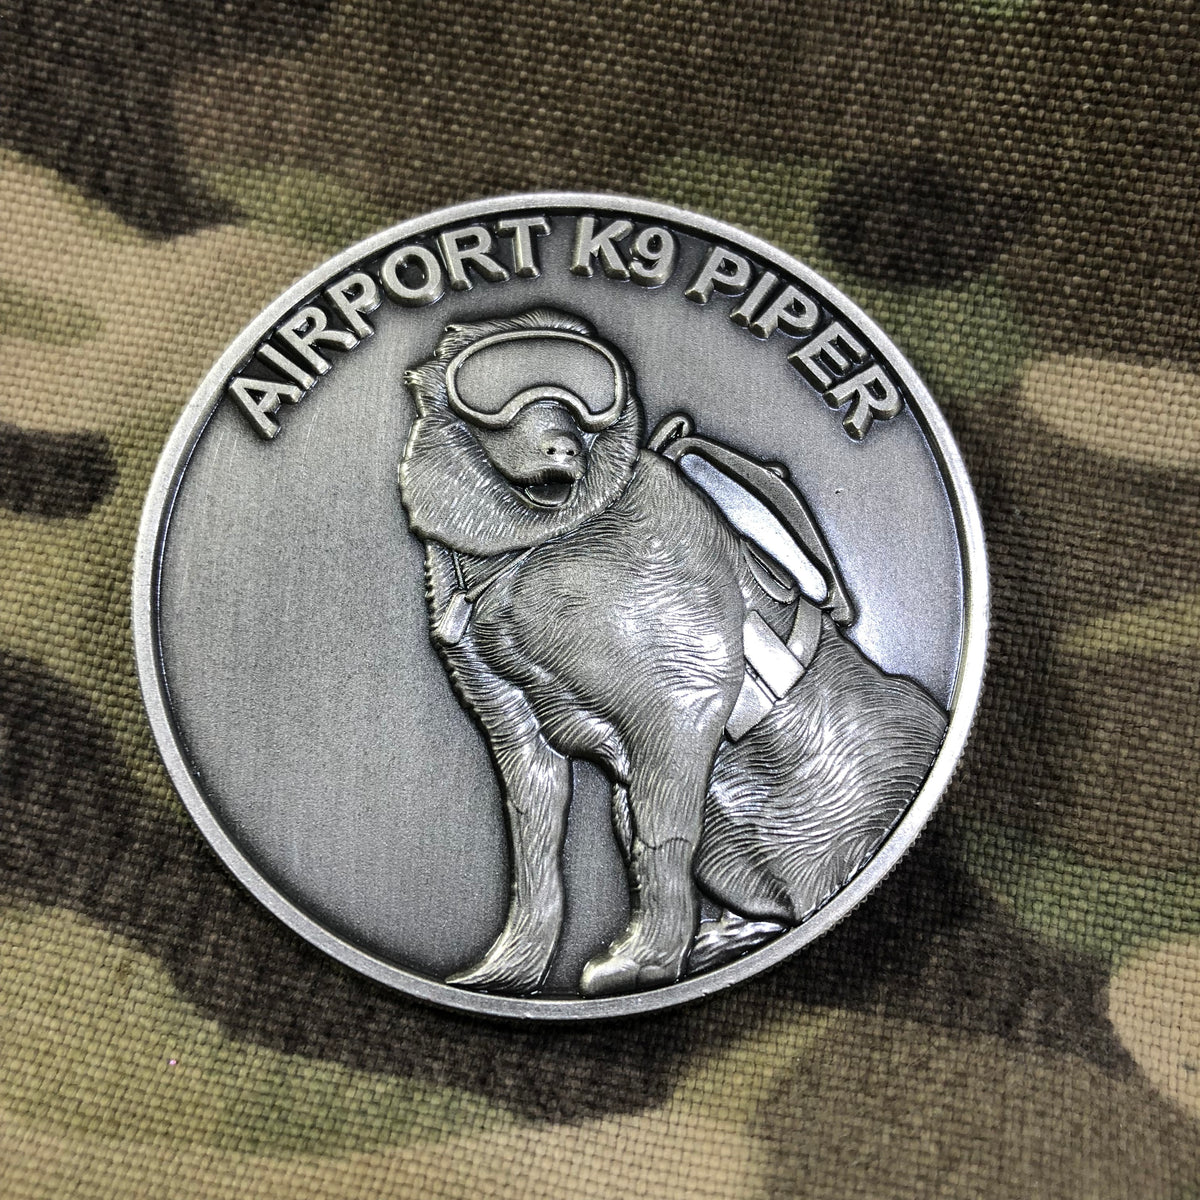 K9 Piper Kit Campaign Challenge Coin